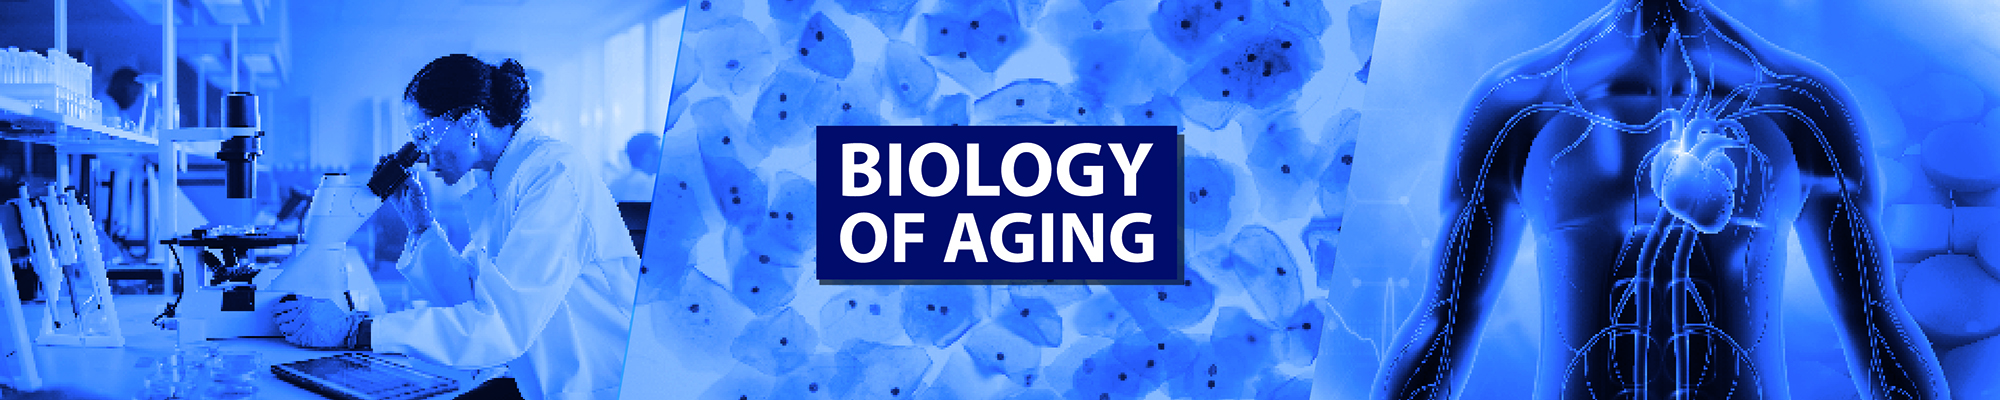 Understanding the biology of aging is essential if we want to rejuvenate aged organs and tissues.